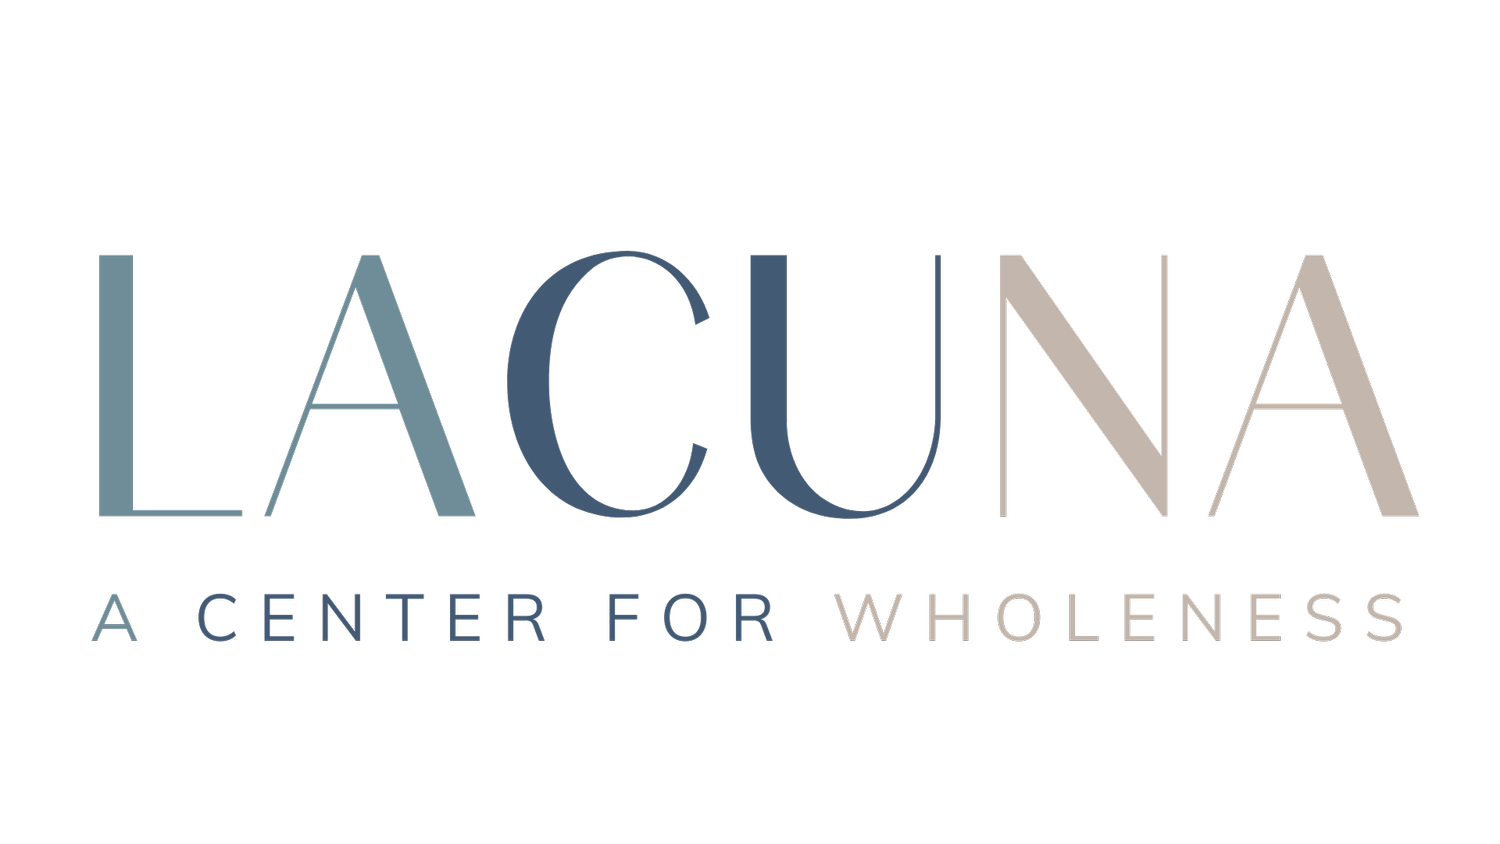 Lacuna Counseling